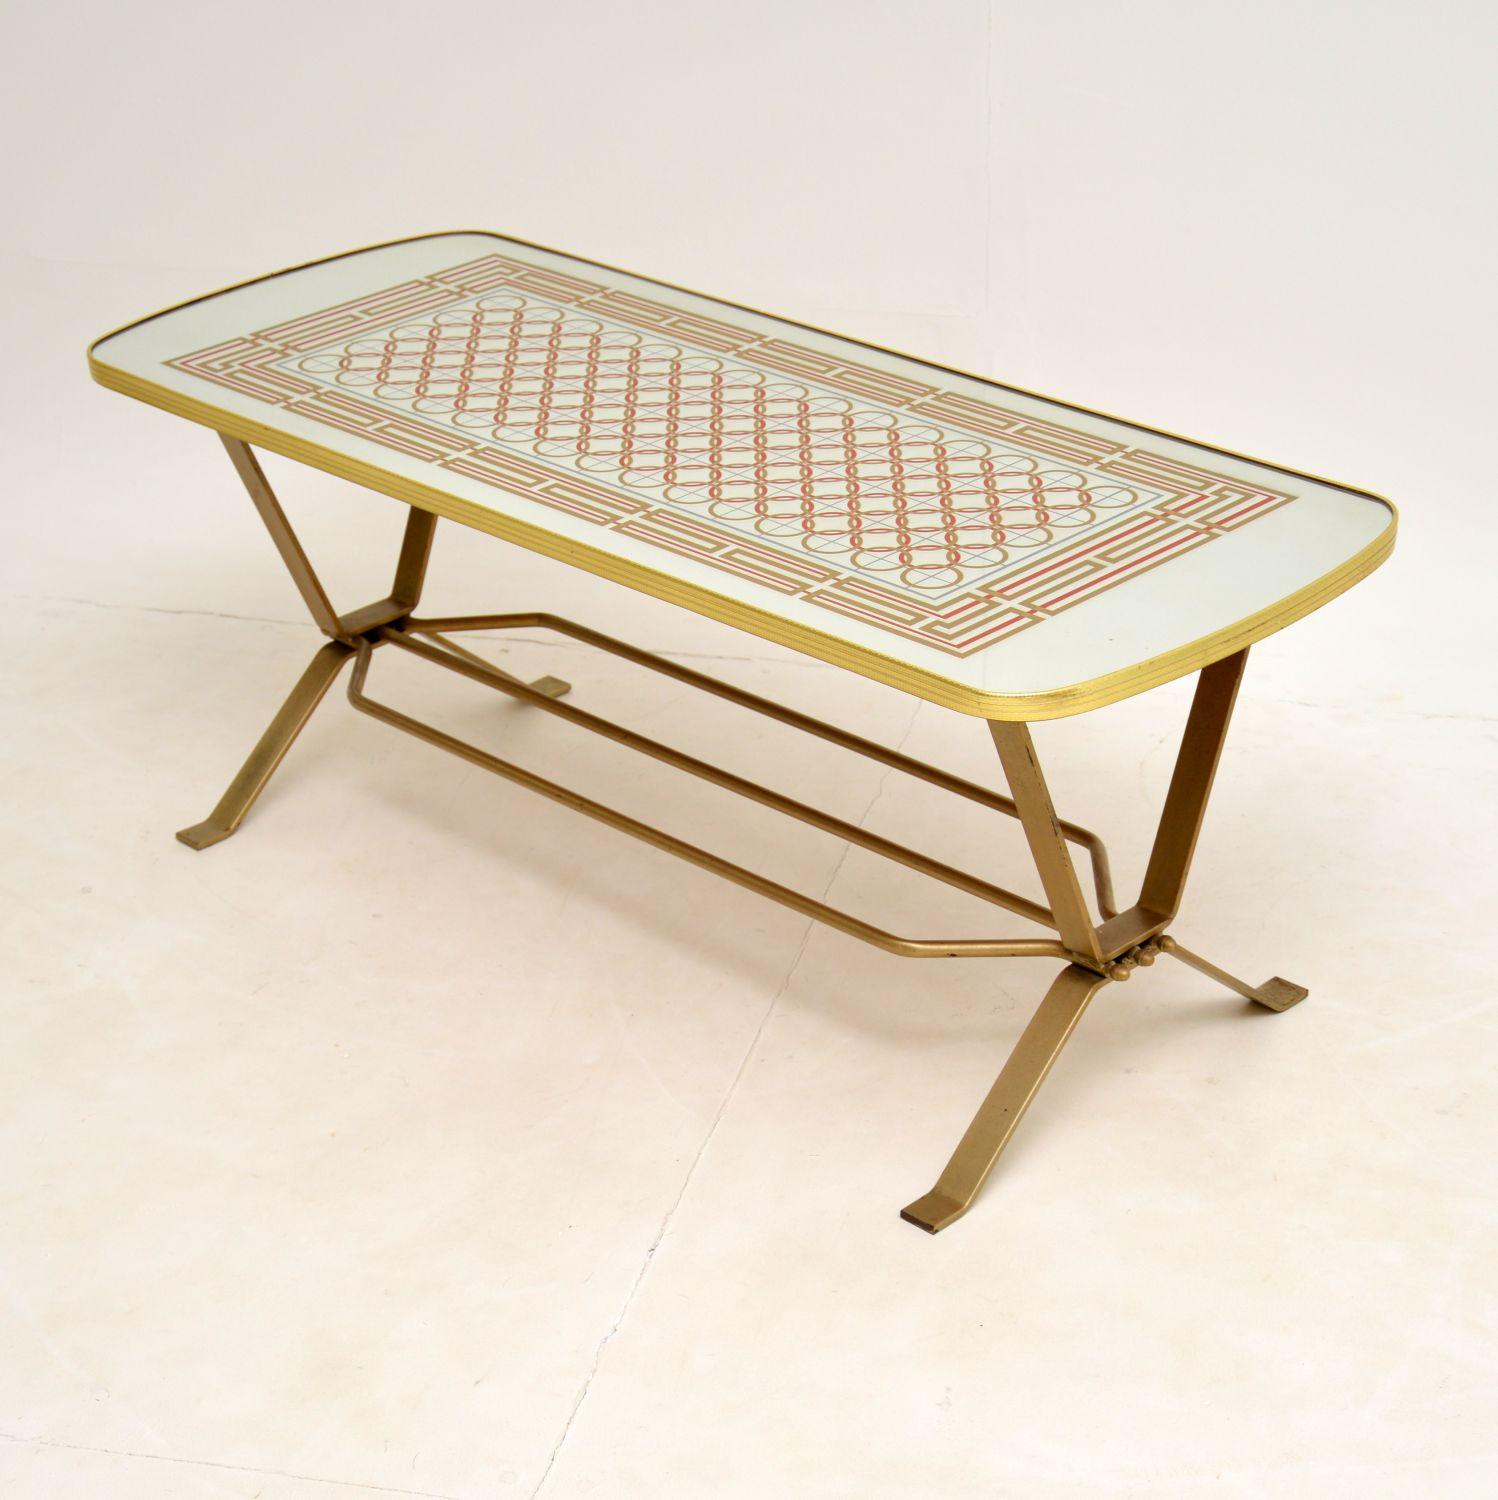 A stylish and interesting vintage coffee table, made in England and dating from the 1970’s.

This has a mirrored top with coloured geometric patterns, and a steel base with gold paint finish. The quality is excellent, this is well built and sturdy.